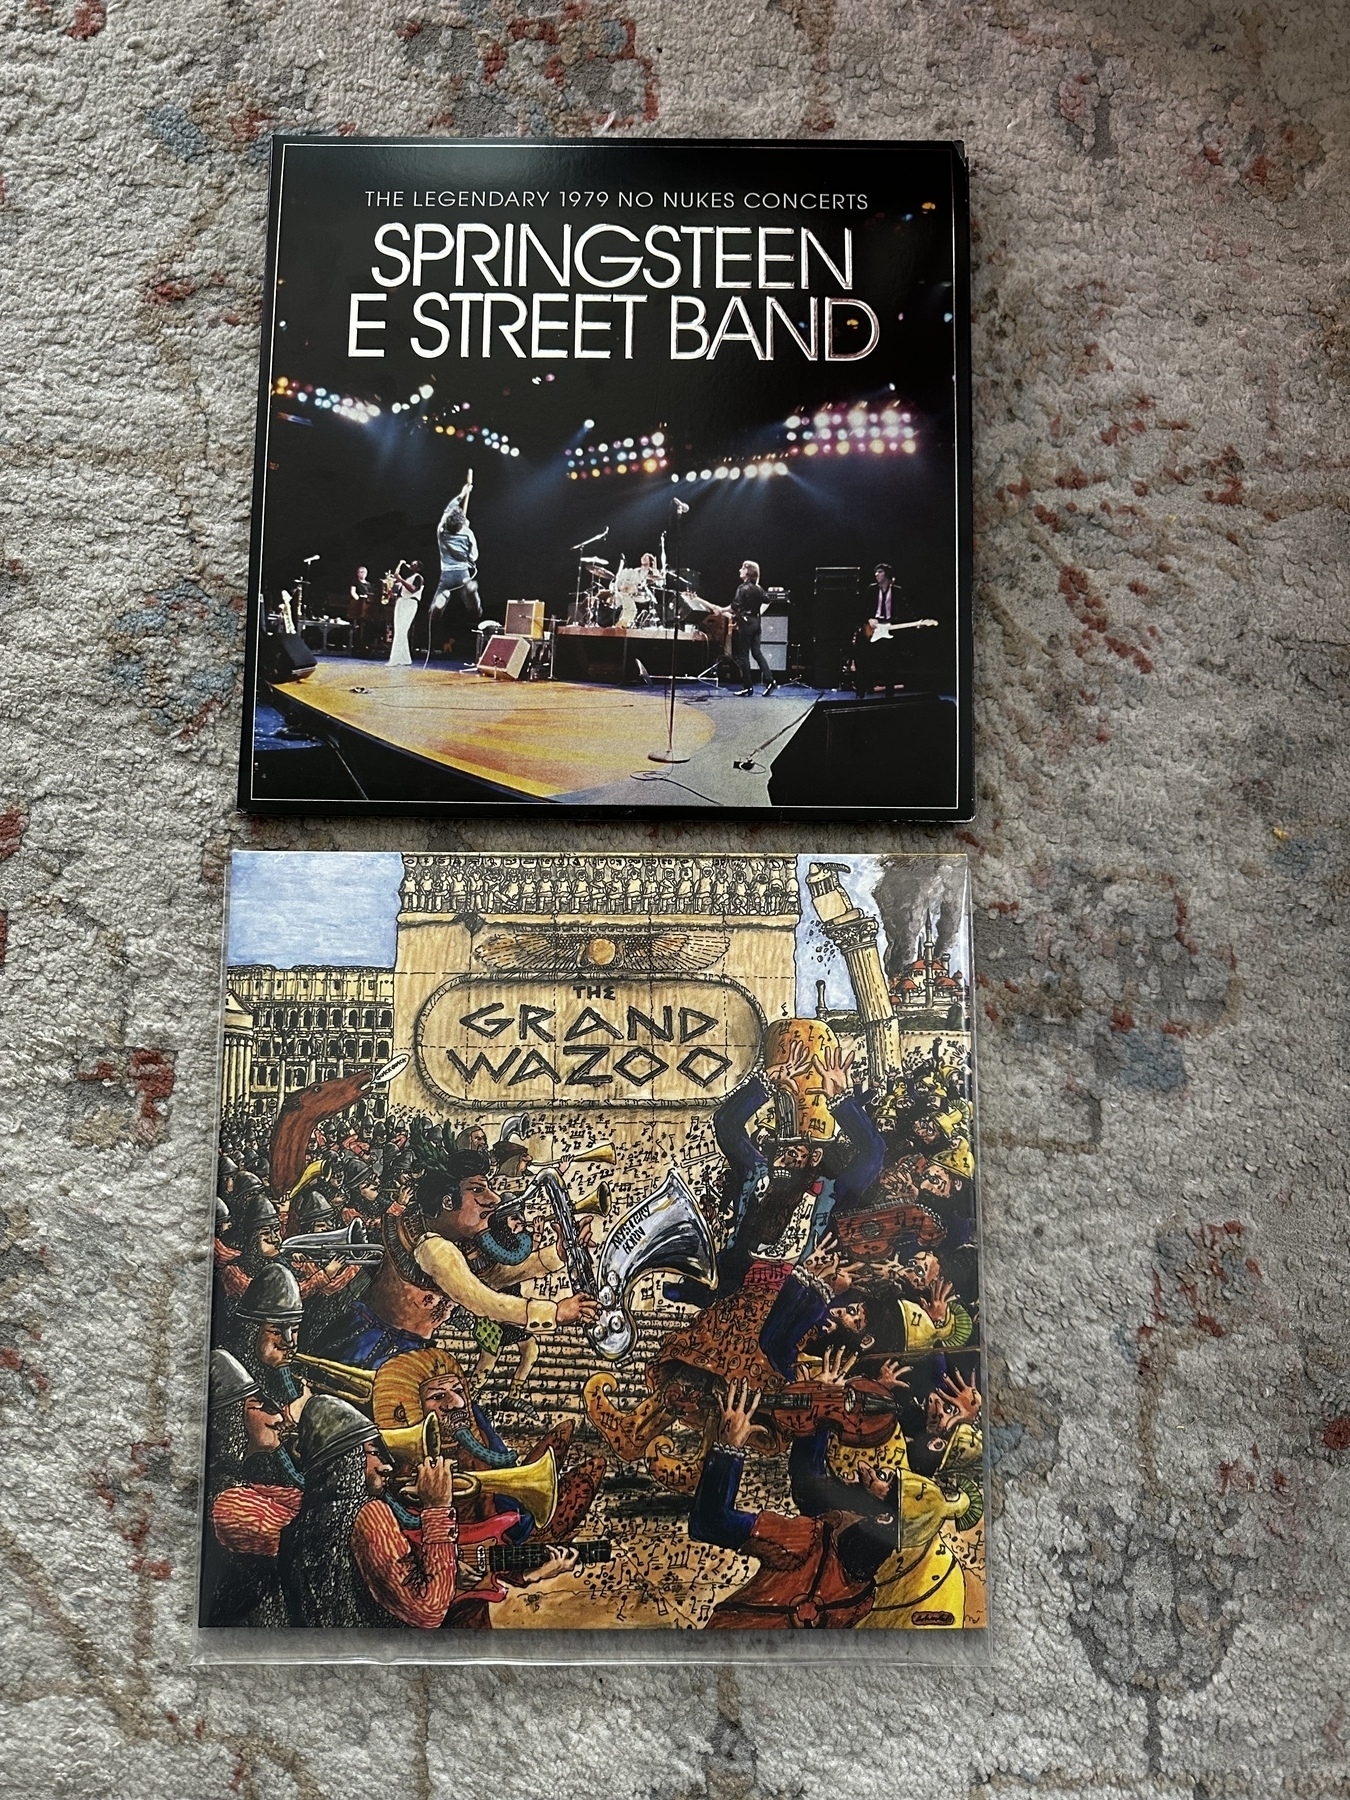 The Legendary No Nukes Concert by Bruce Springsteen and the E Street Band and The Grand Wazoo by Frank Zappa, both on vinyl LPs